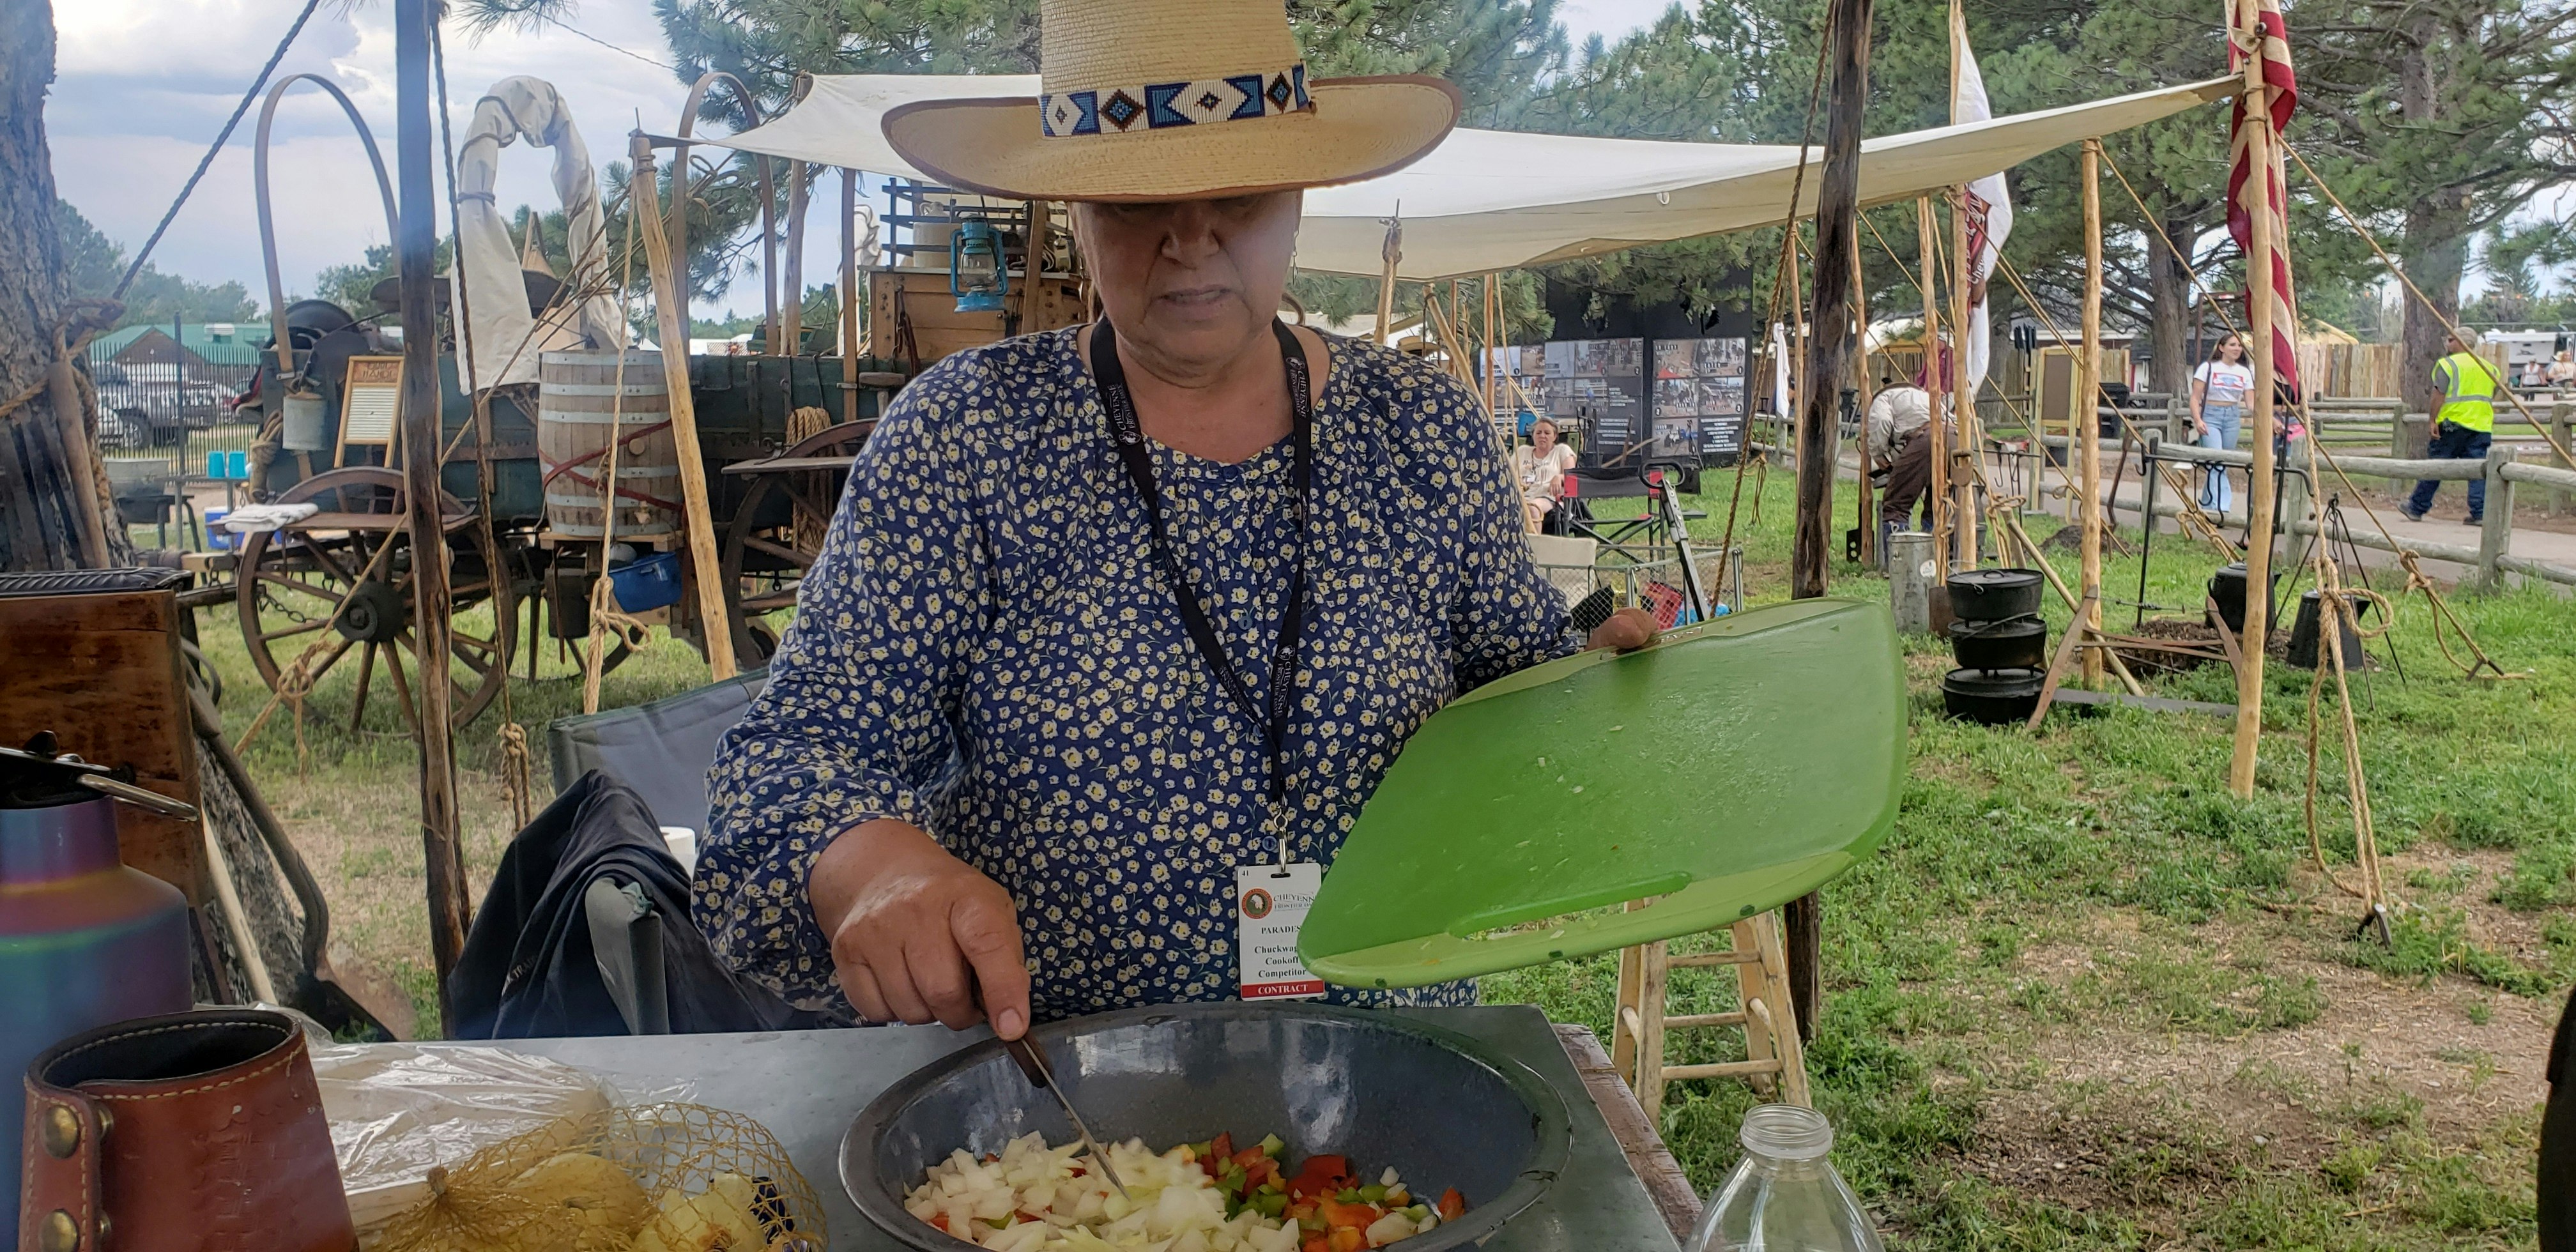 Deb Herman finishes slicing up vegetables for a private taco and fajita night at the chuckwagon camp.